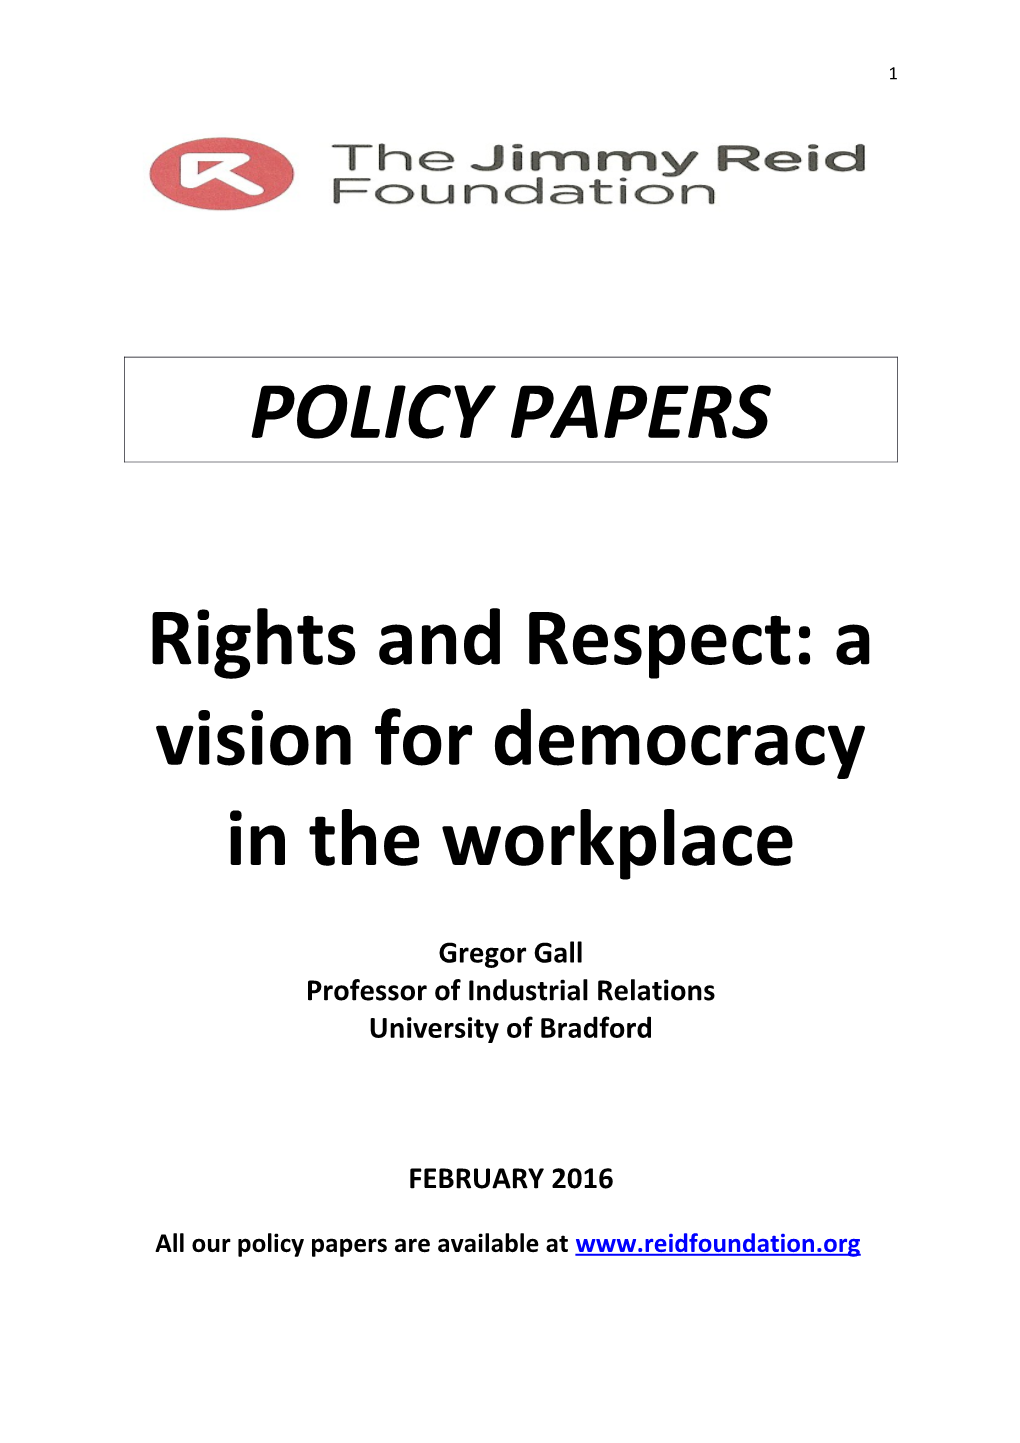 Rights and Respect: a Vision for Democracy in the Workplace